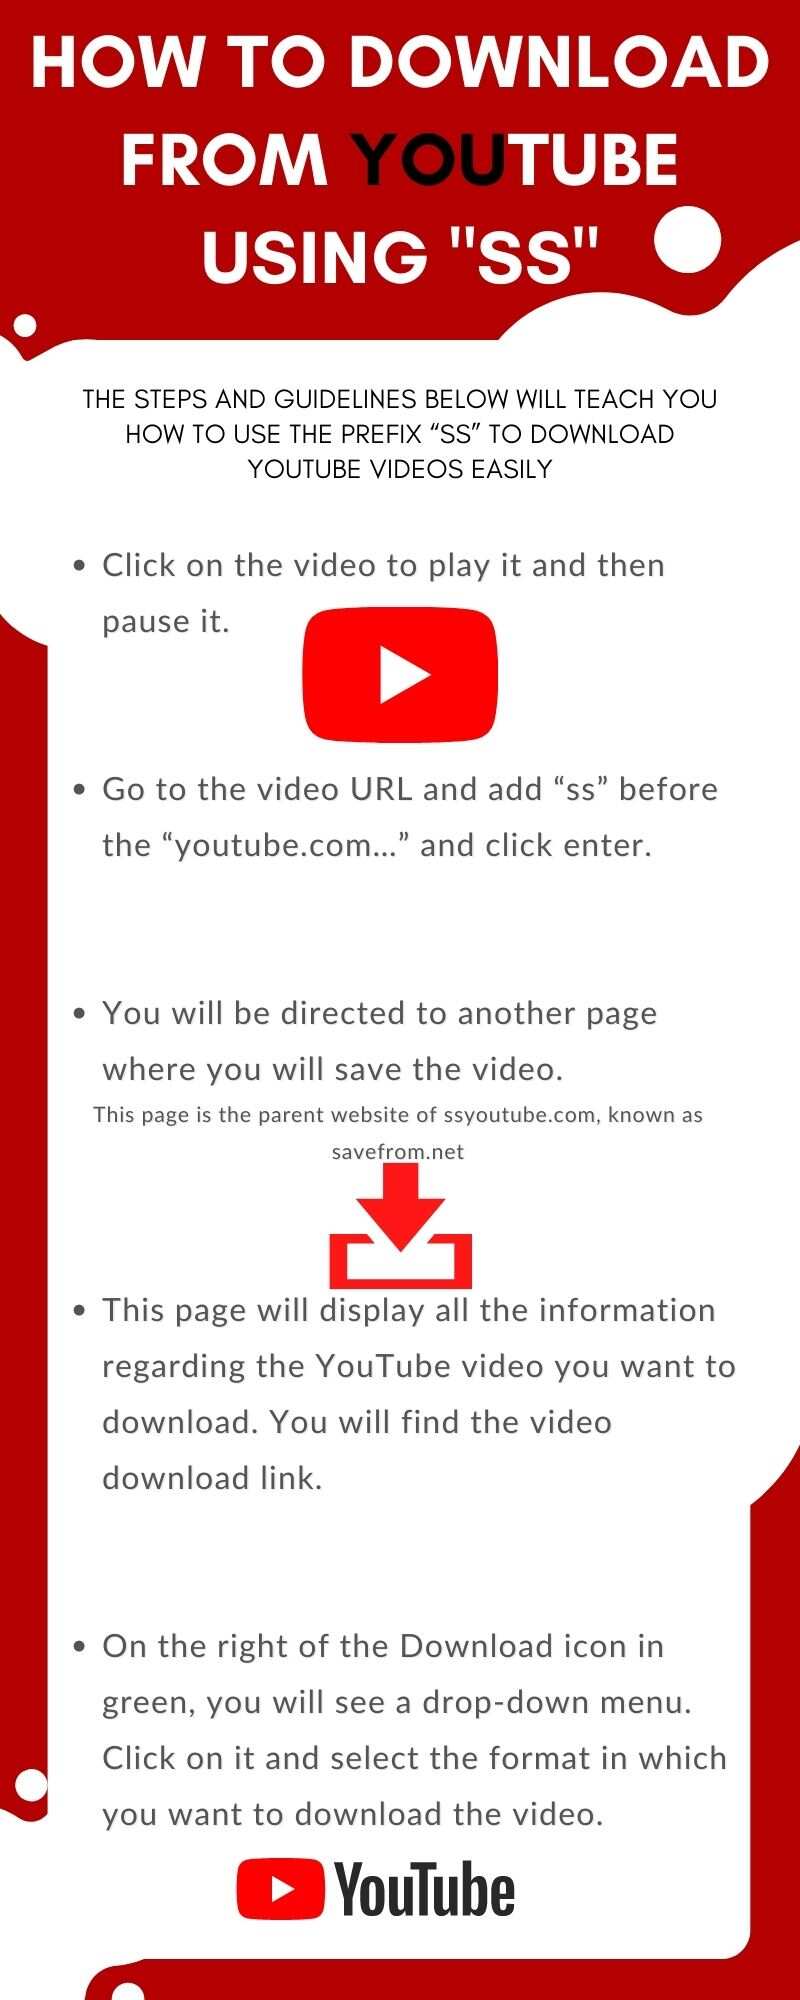 How to download from YouTube